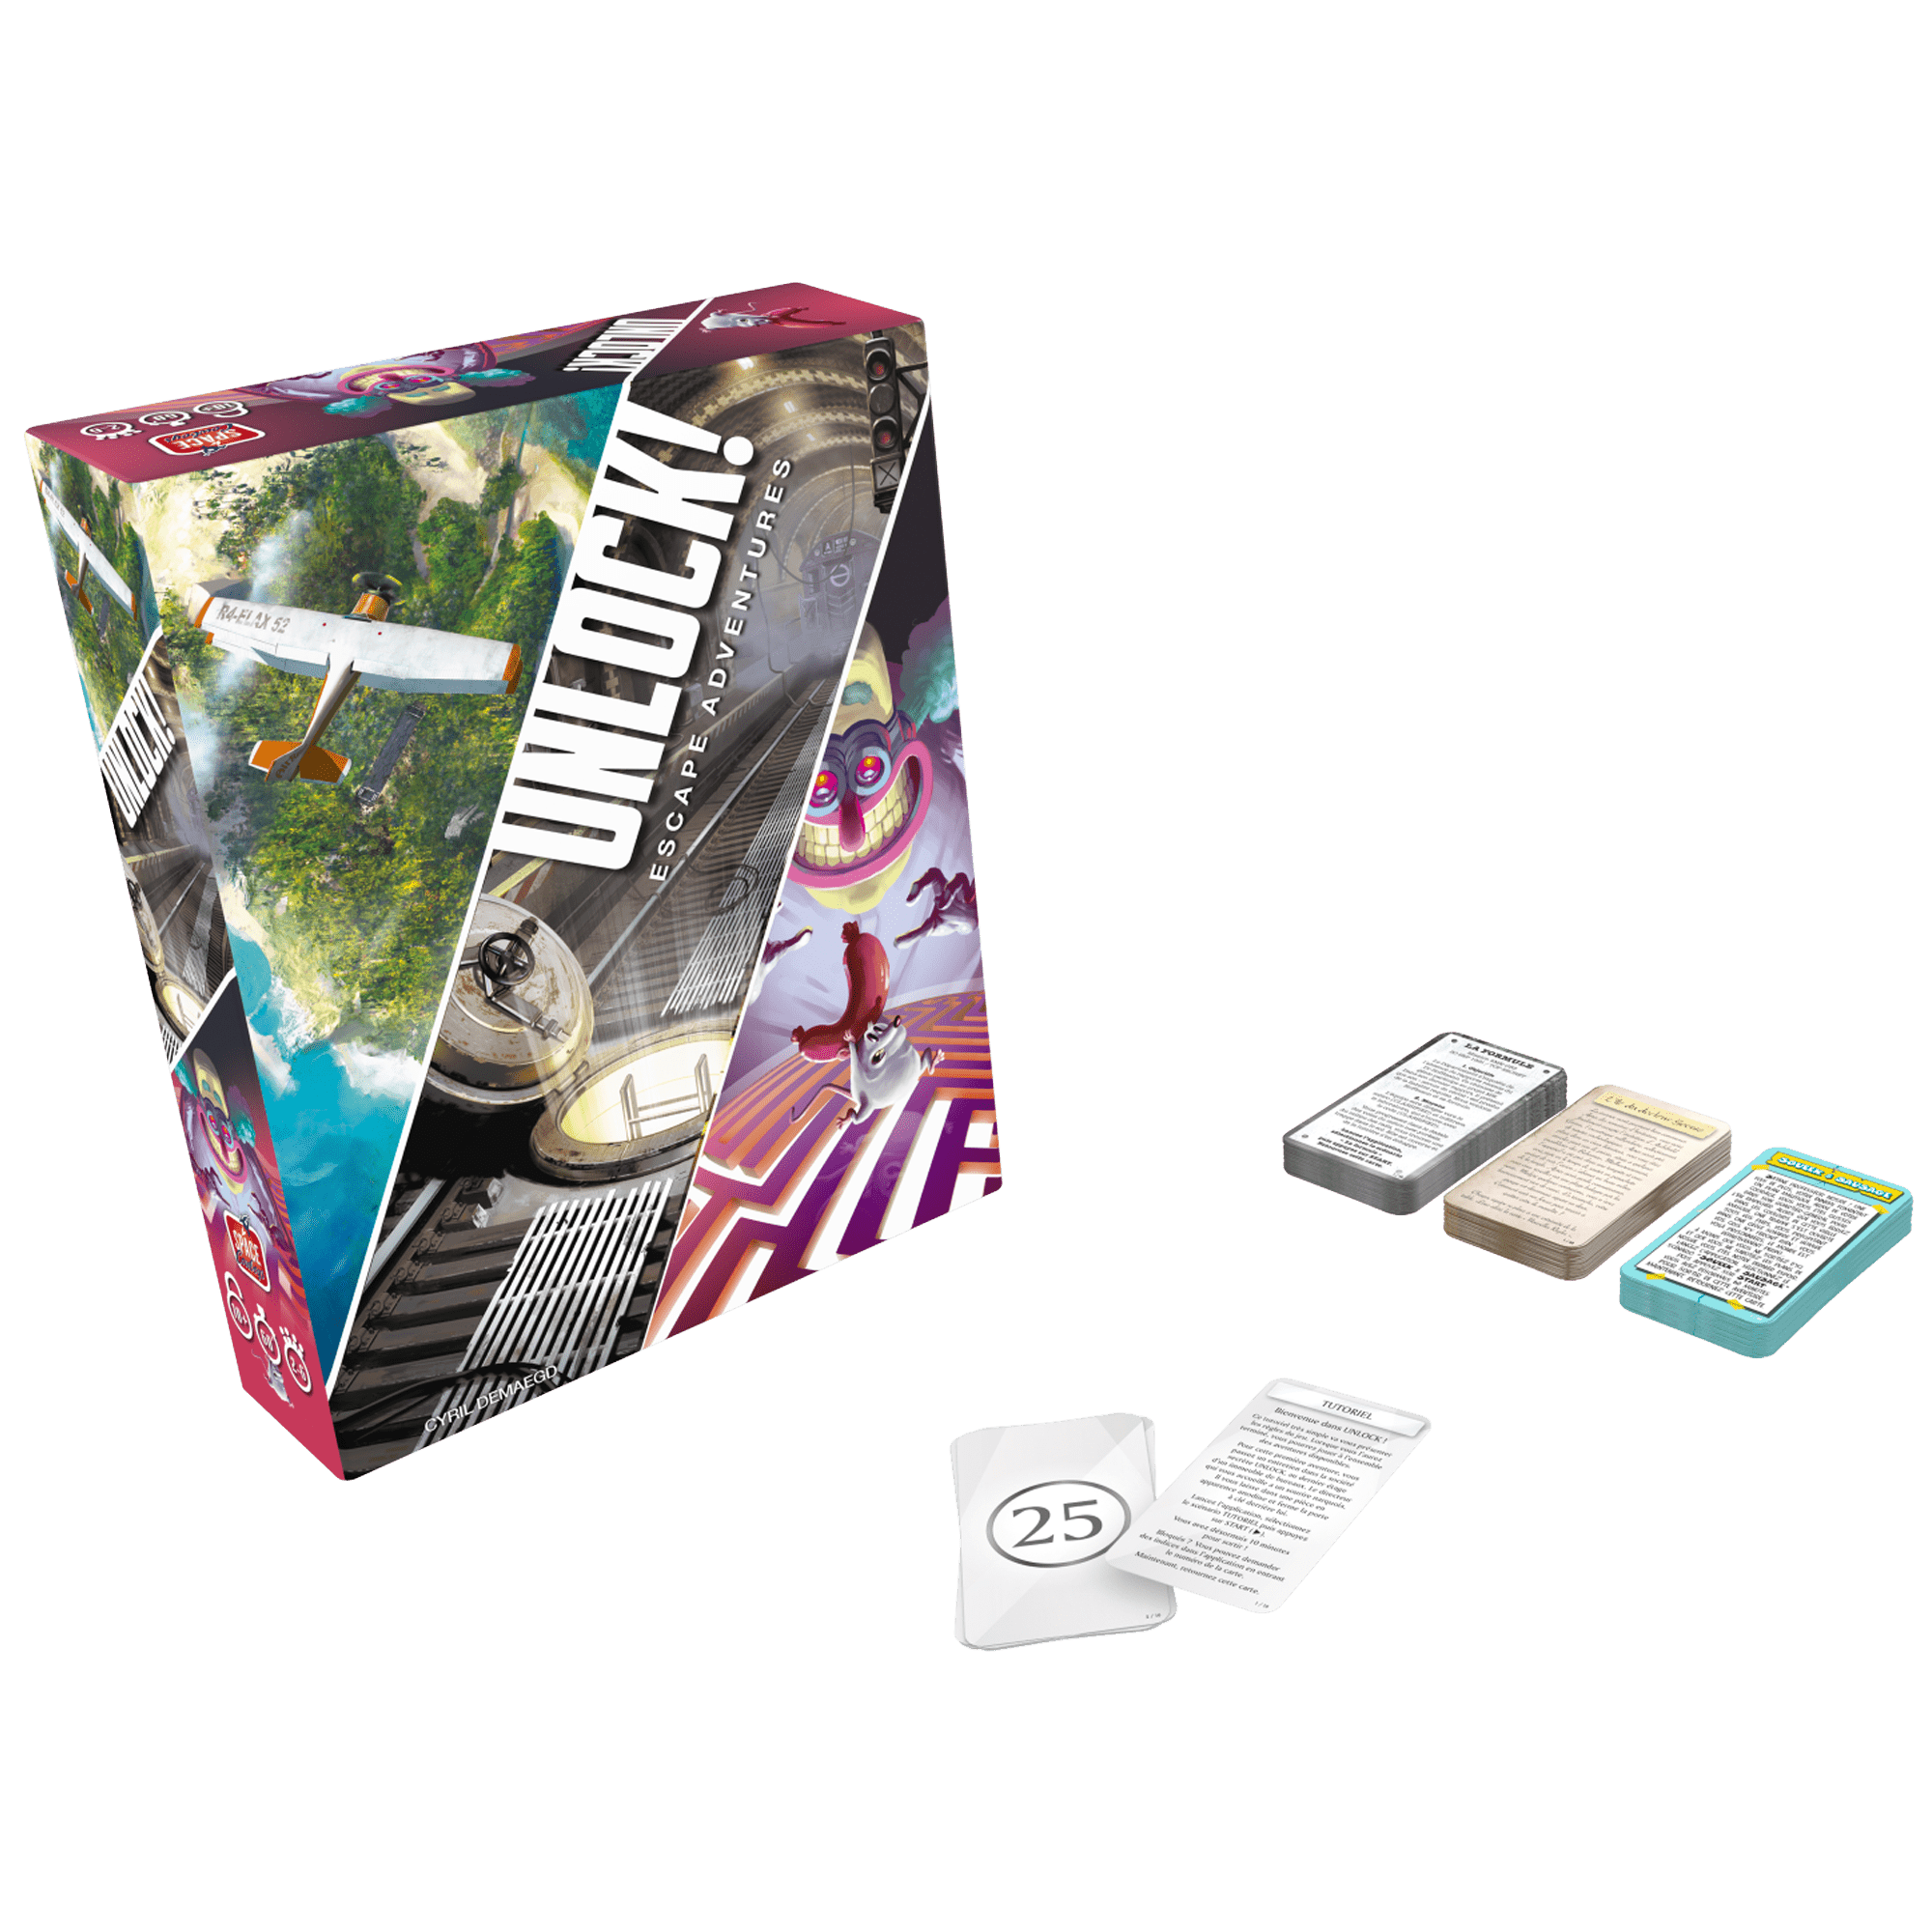 Unlock! Game Adventures Card Game - Escape Room-Inspired Cooperative  Adventure, Fun Family Game for Kids and Adults, Ages 10+, 1-6 Players, 1  Hour